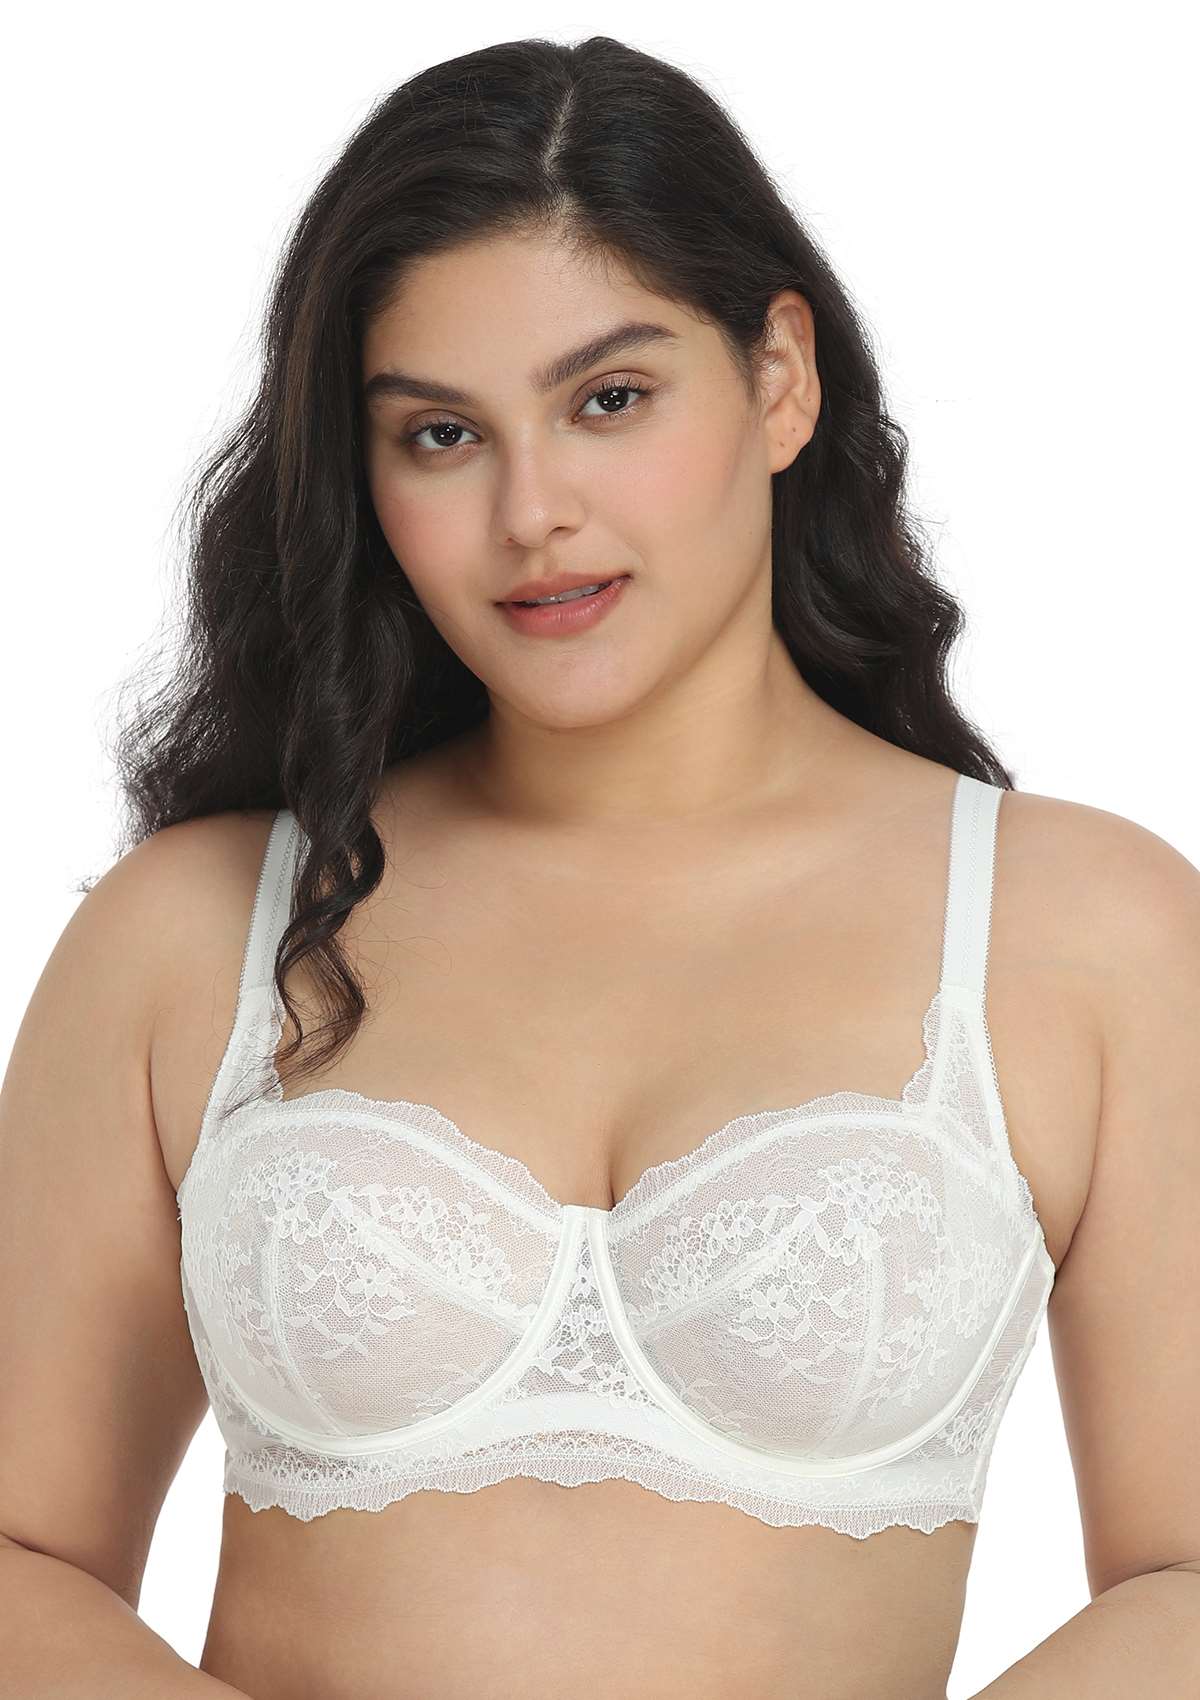 HSIA I Do Floral Lace Bridal Balconette Beautiful Bra For Special Day - Burgundy / 40 / DD/E